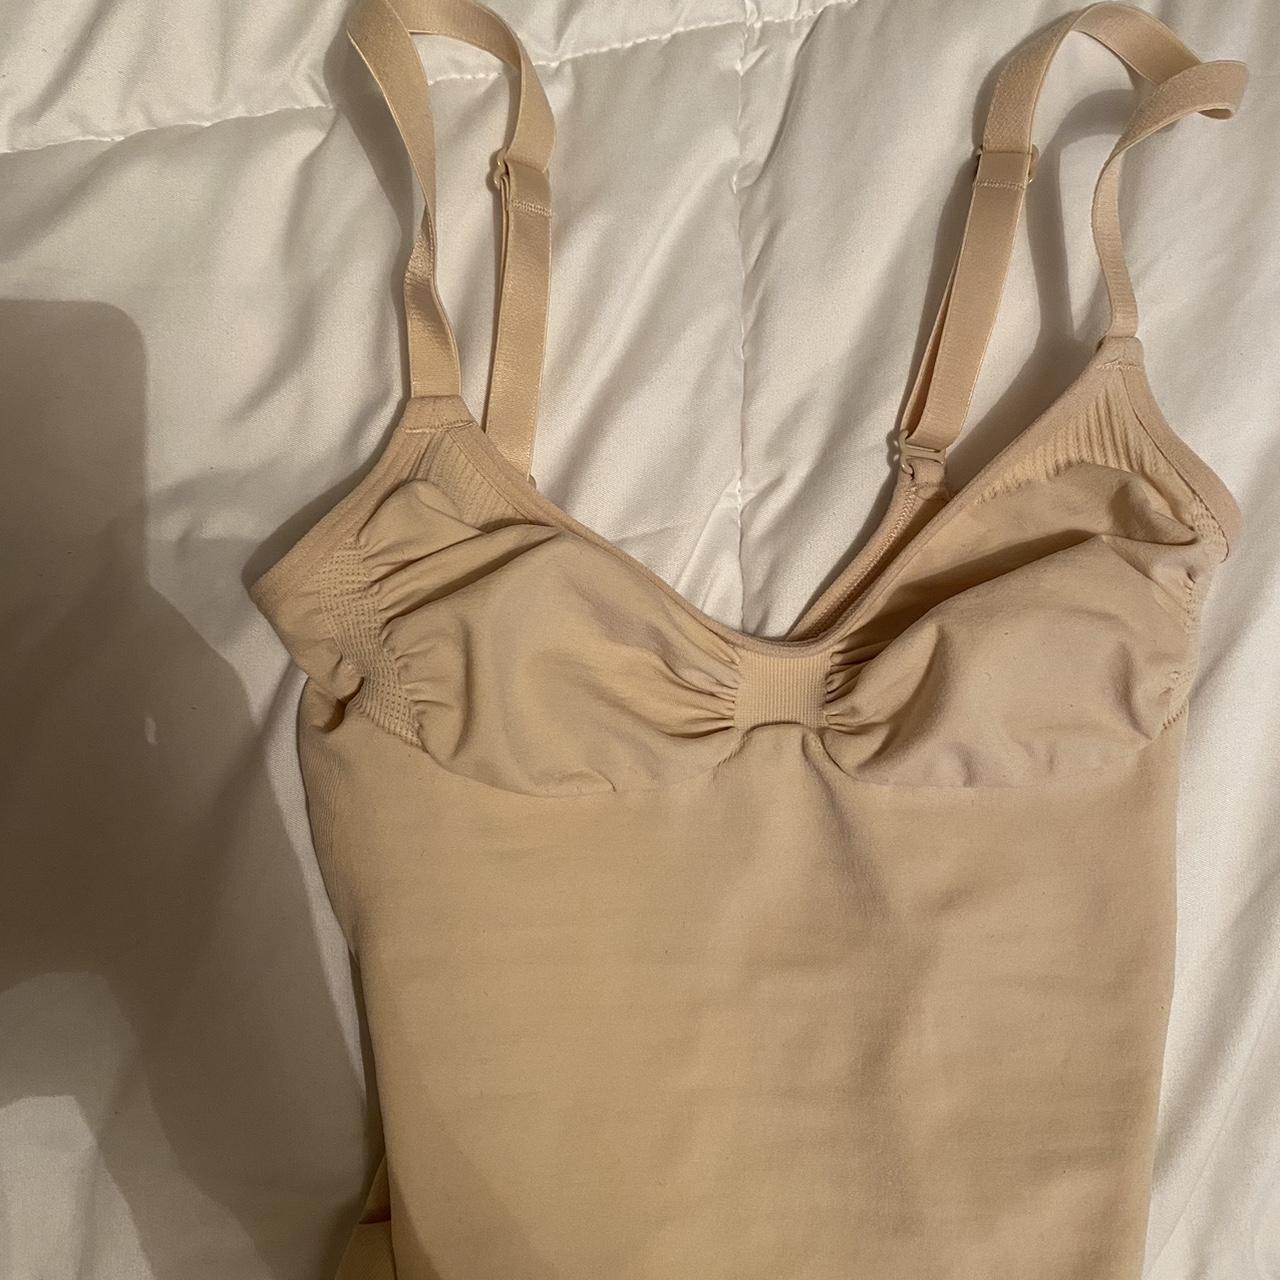 Skims bodysuit Size small Like a spank and tightens - Depop